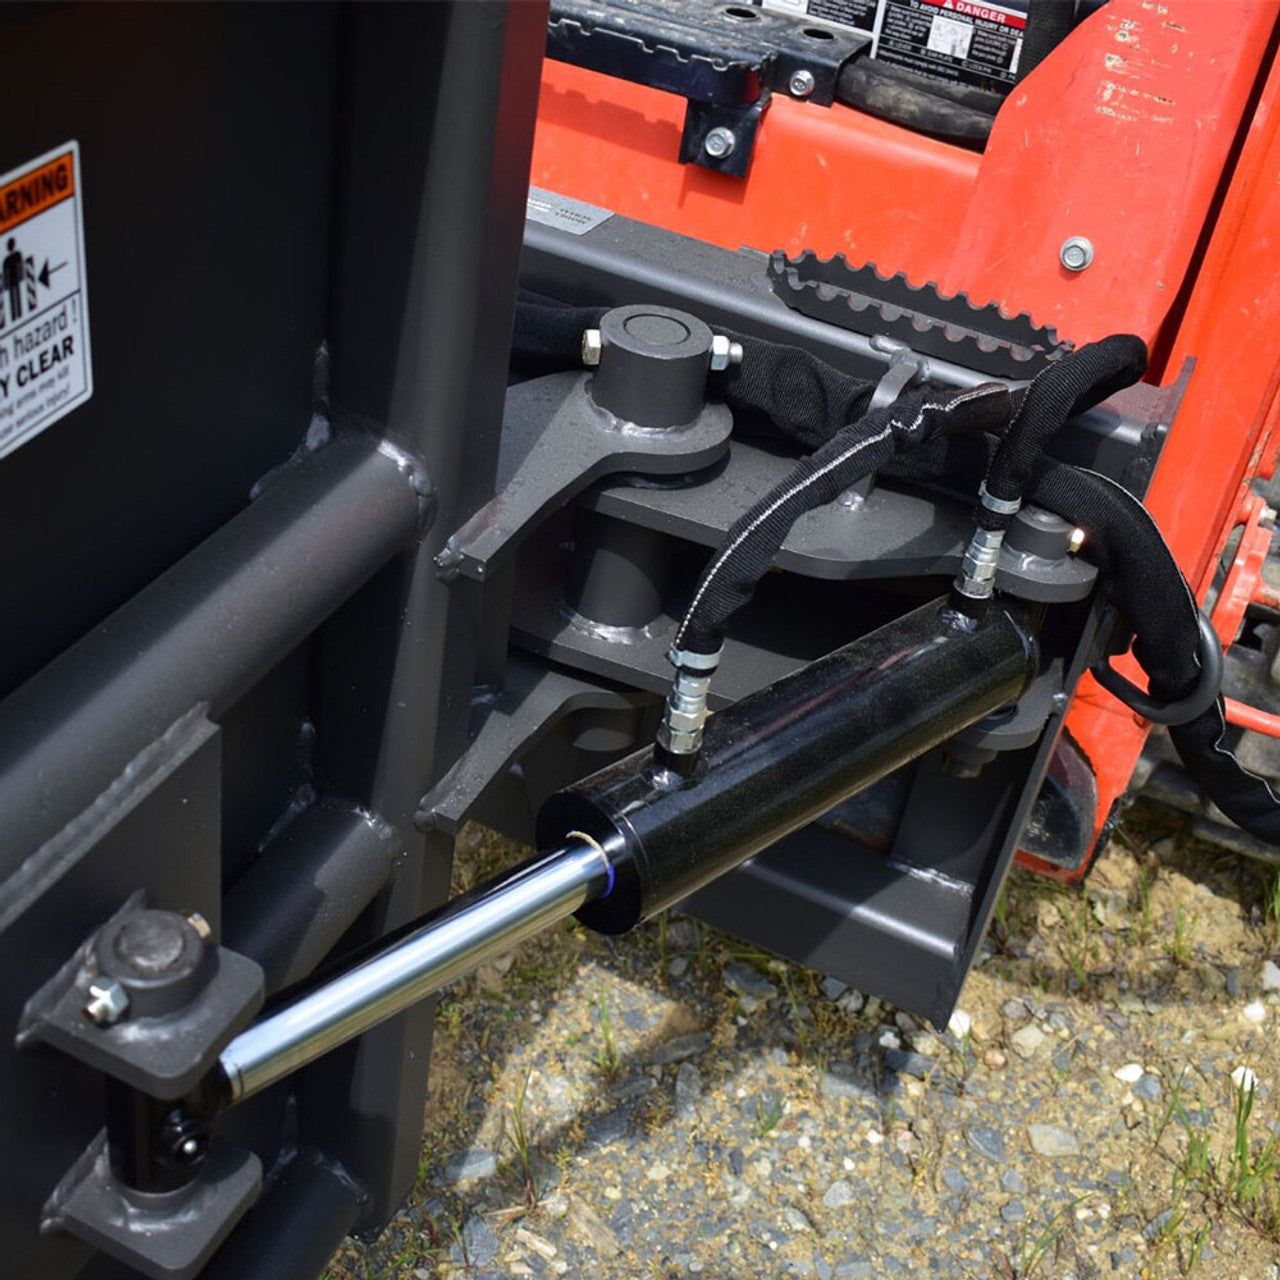 CID X-TREME BALE SQUEEZER ATTACHMENT FOR SKID STEER